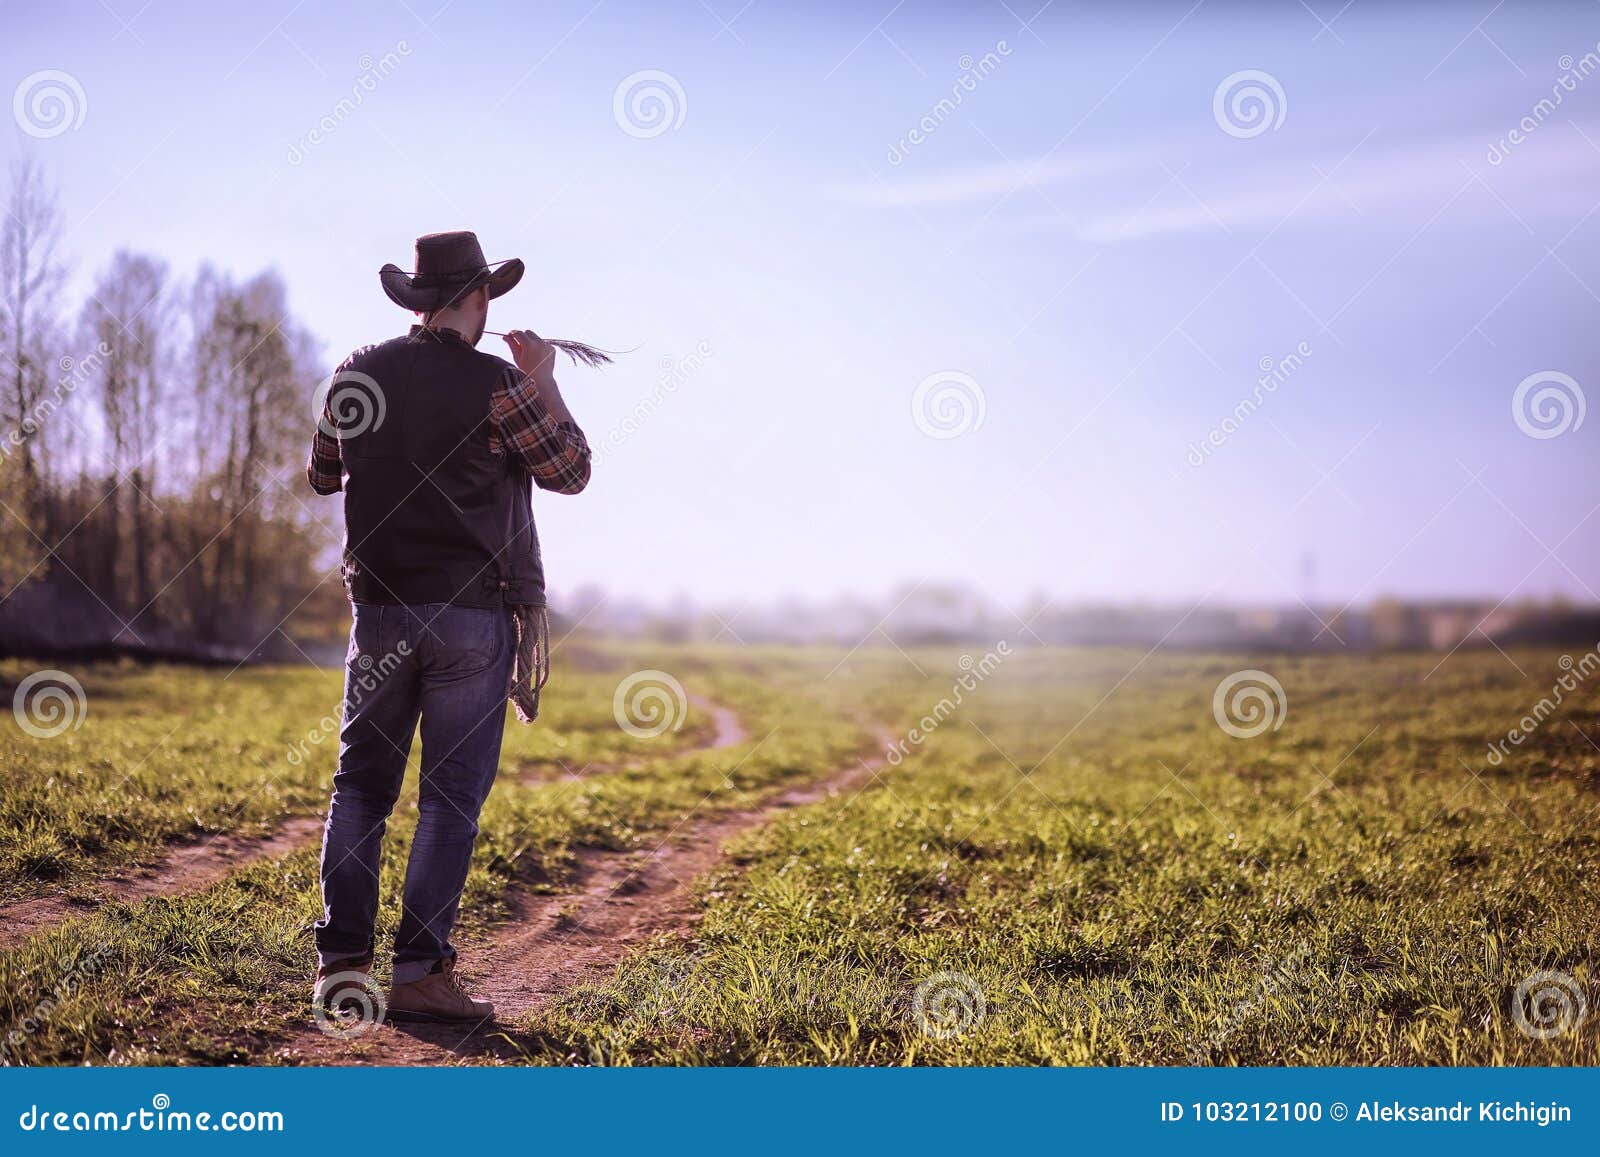 Cowboy Standing In A Field At Sunset Stock Photo Image Of Person